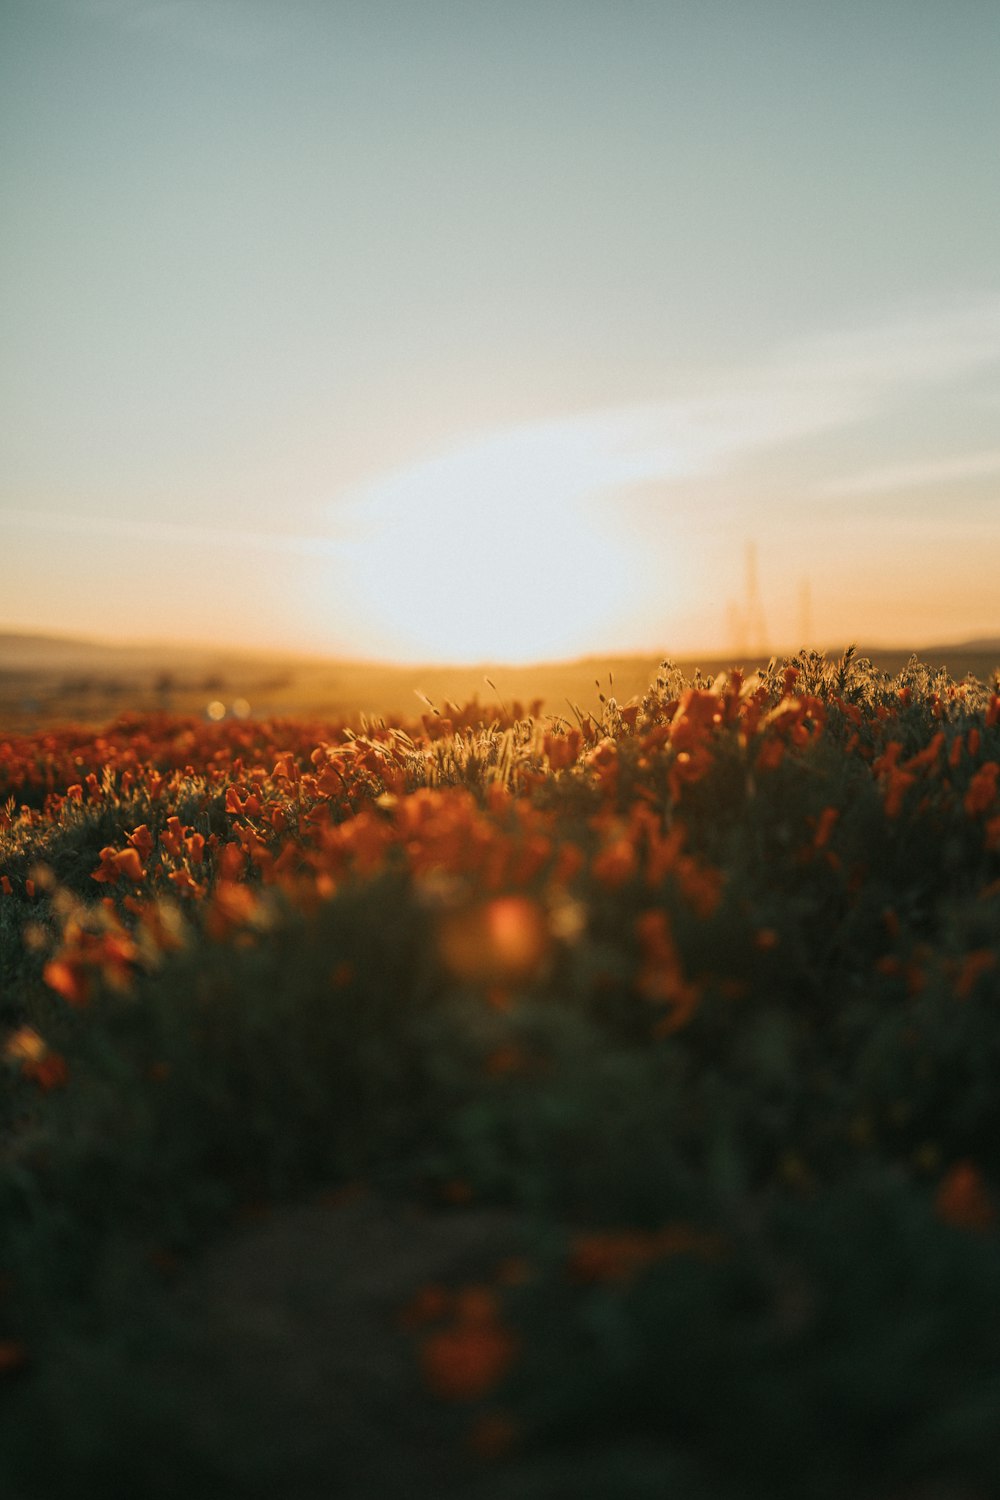 red flower field during sunset